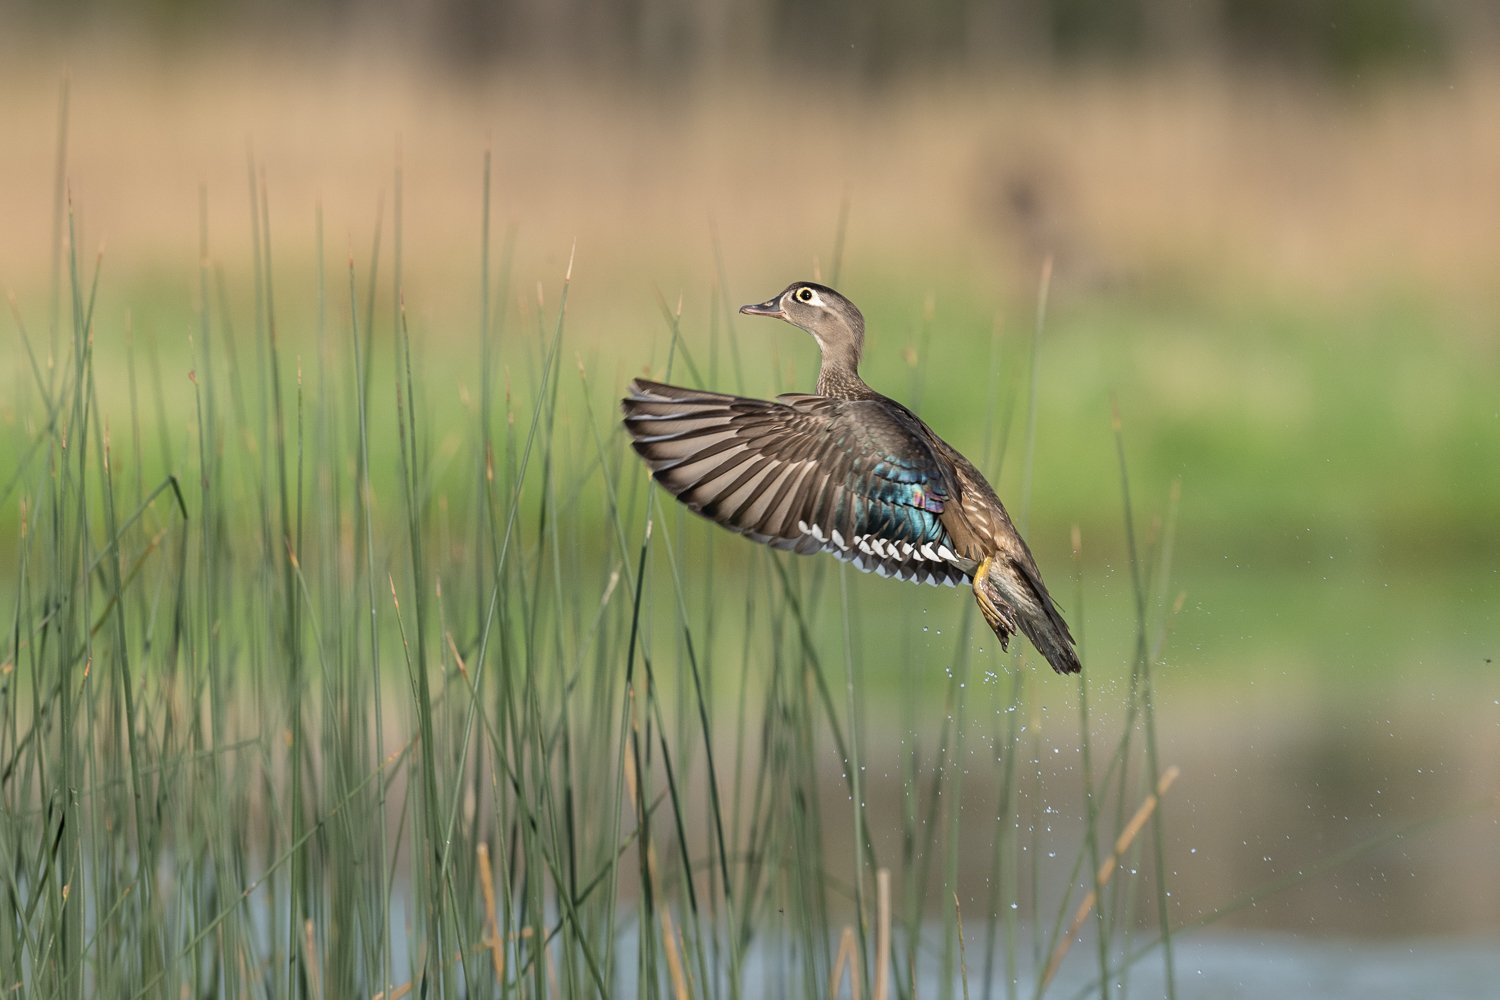 Female Wood Duck taking off from bullrushes